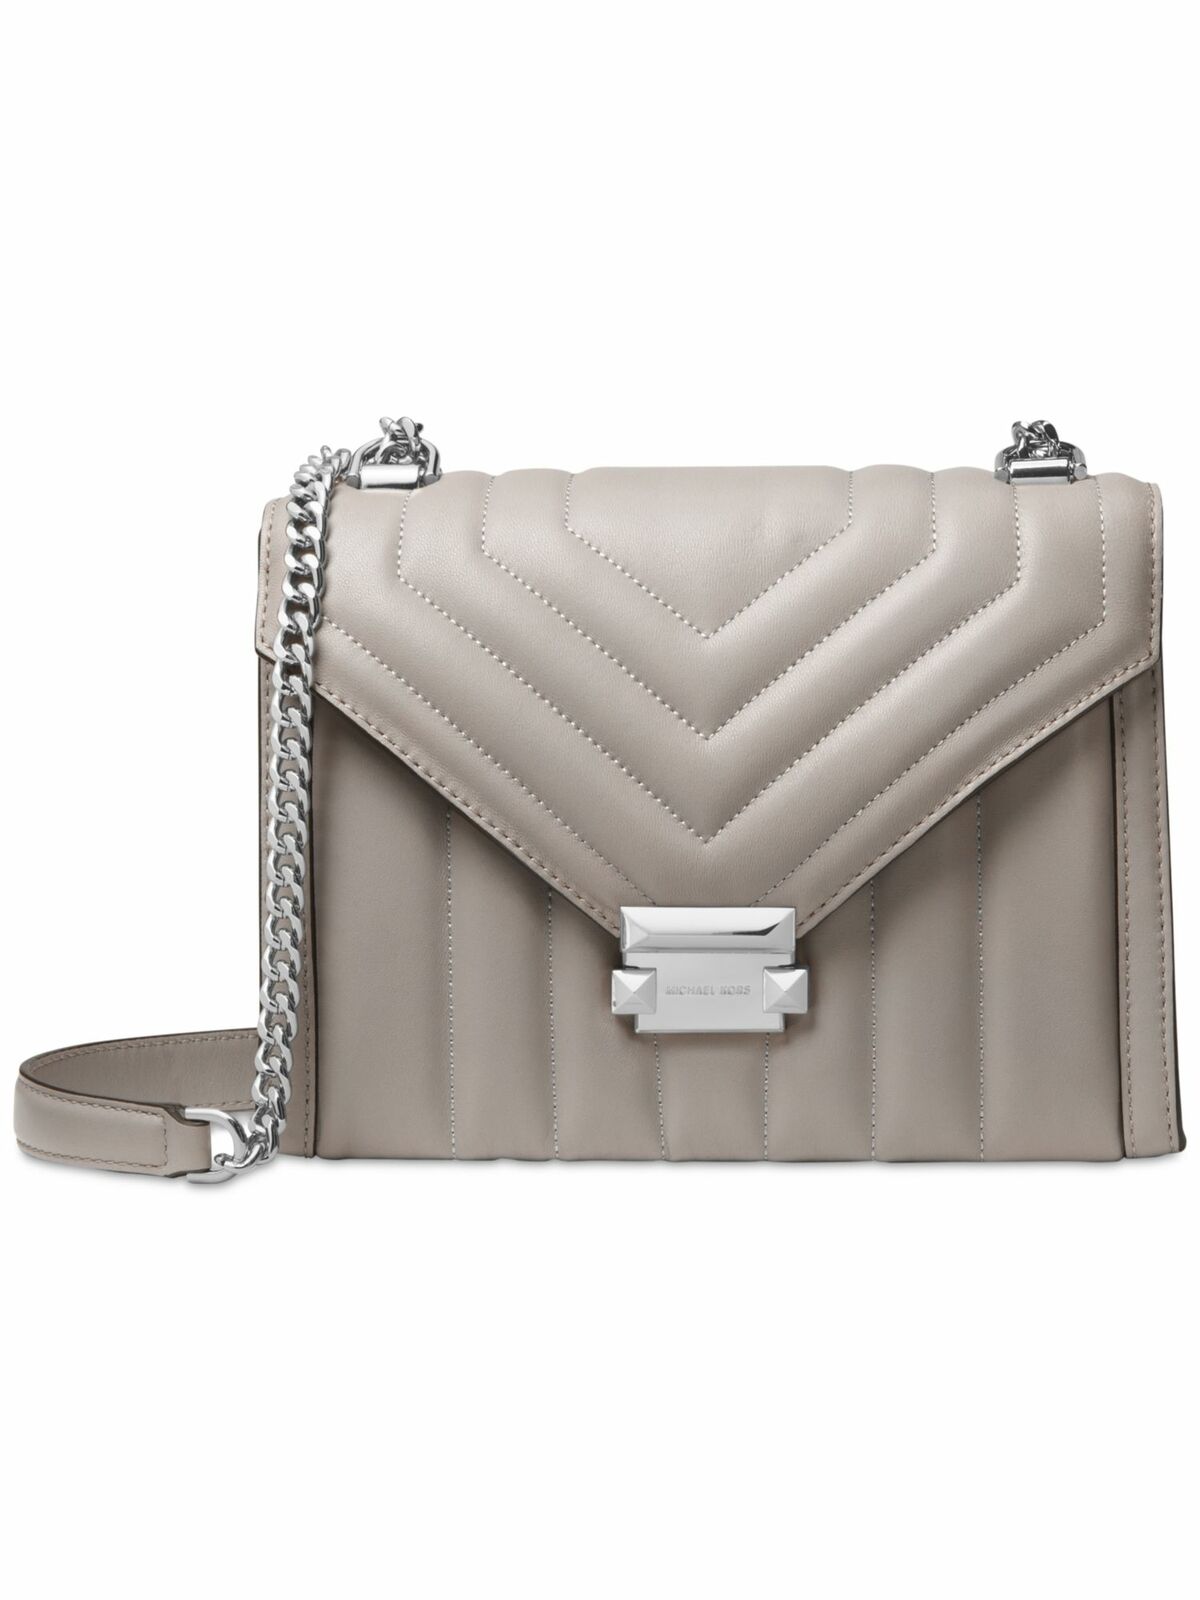 Michael Kors Women's Gray Ribbed Leather Chain Strap Shoulder Bag